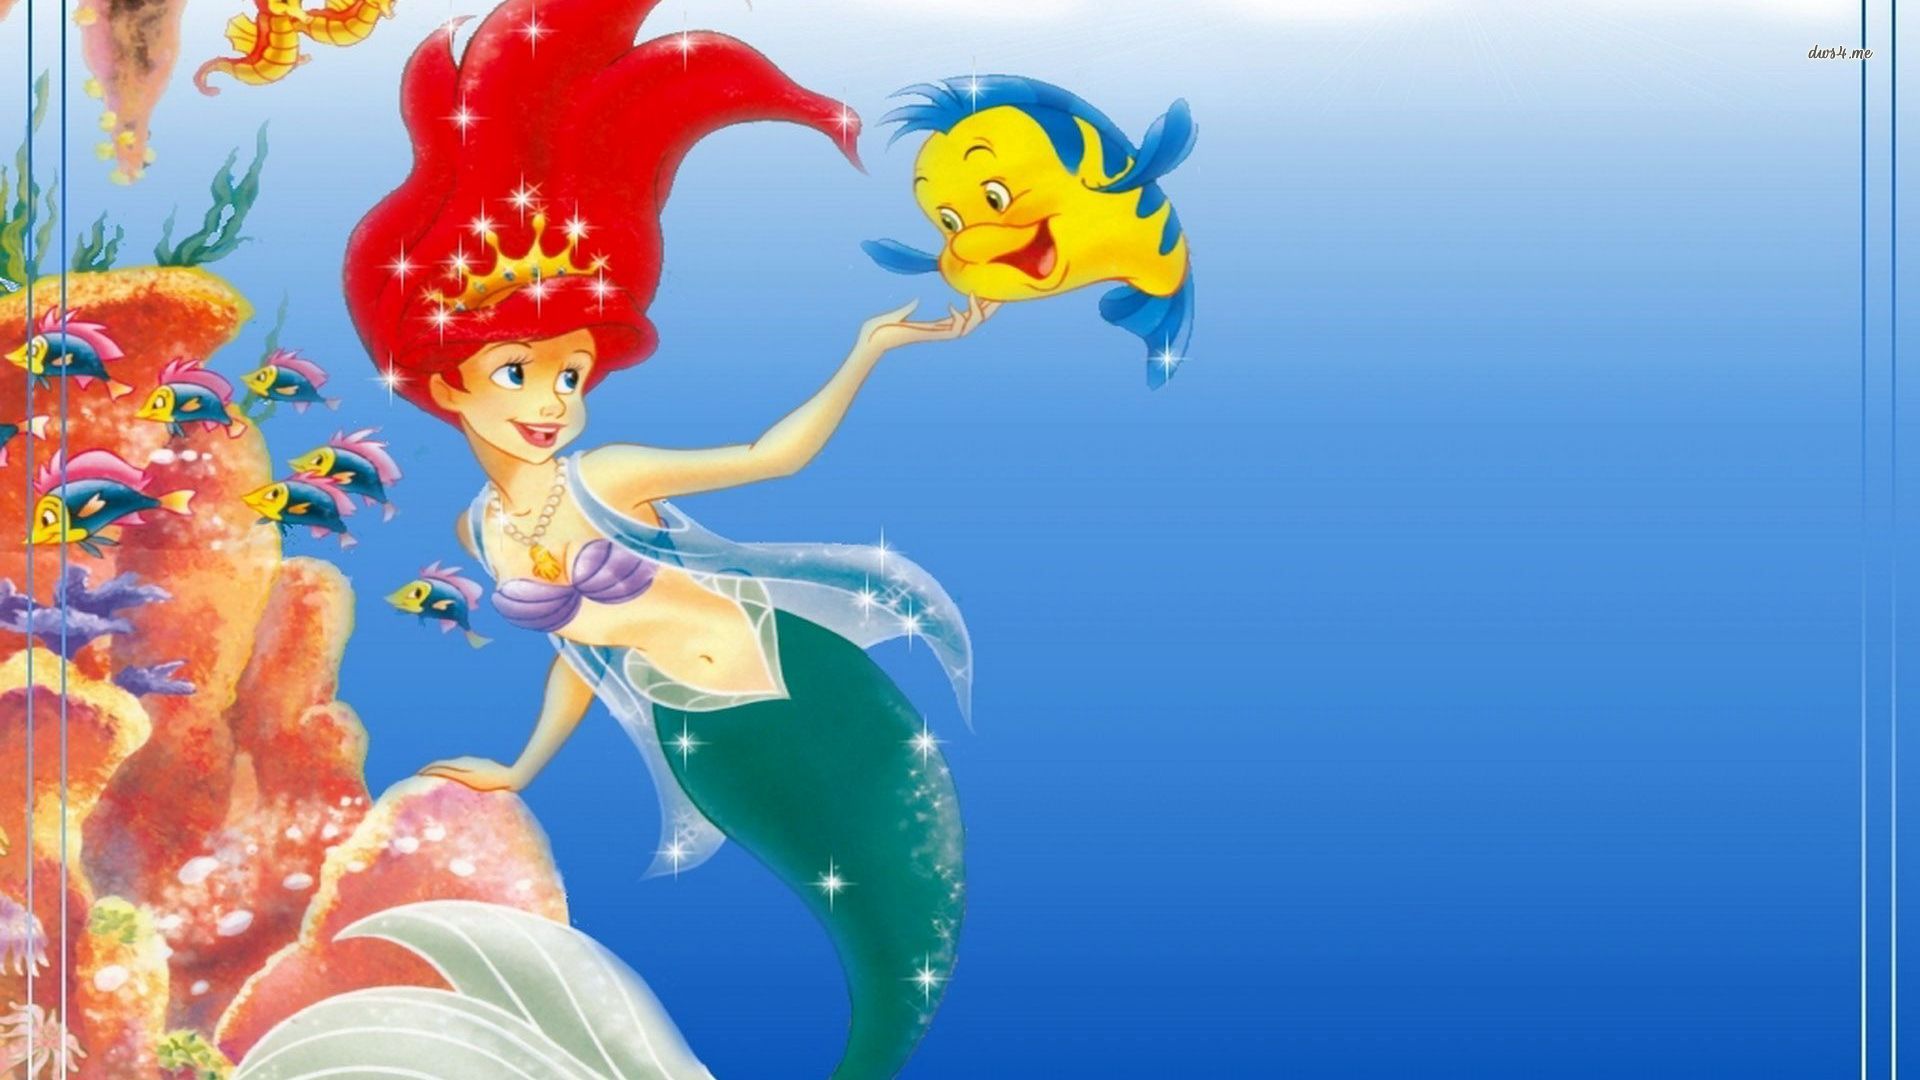 the little mermaid 1080P 2k 4k HD wallpapers backgrounds free download   Rare Gallery